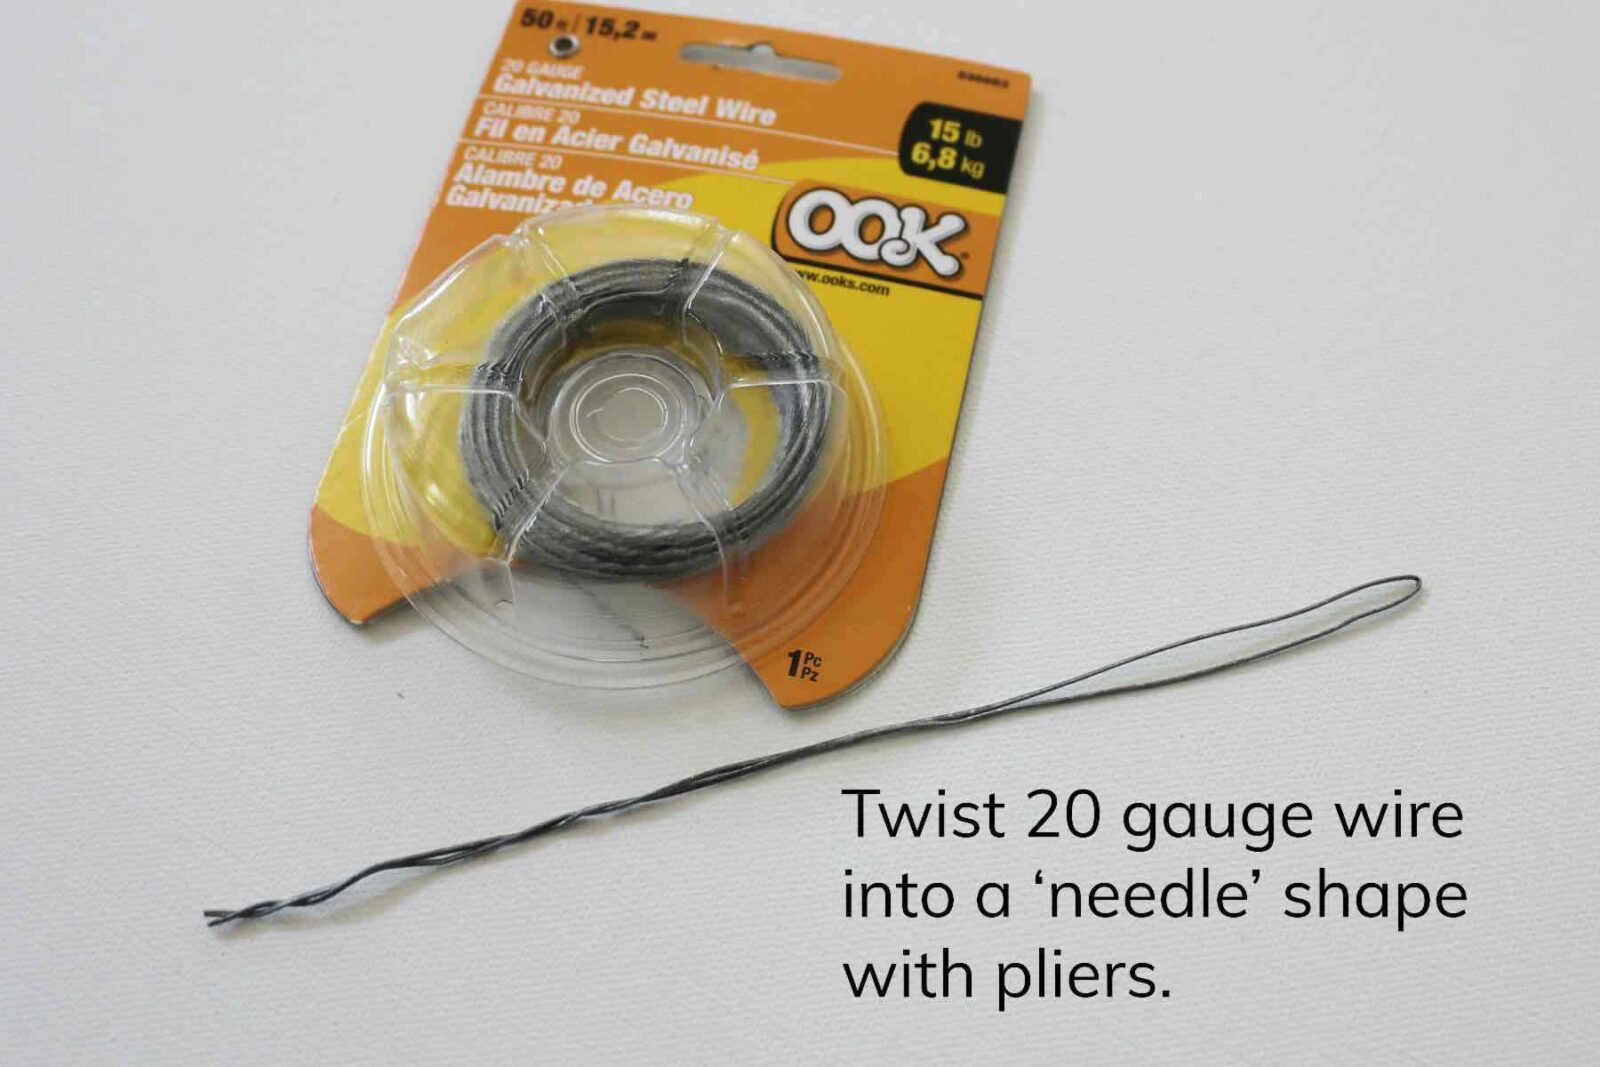 1. Shape wire for ties